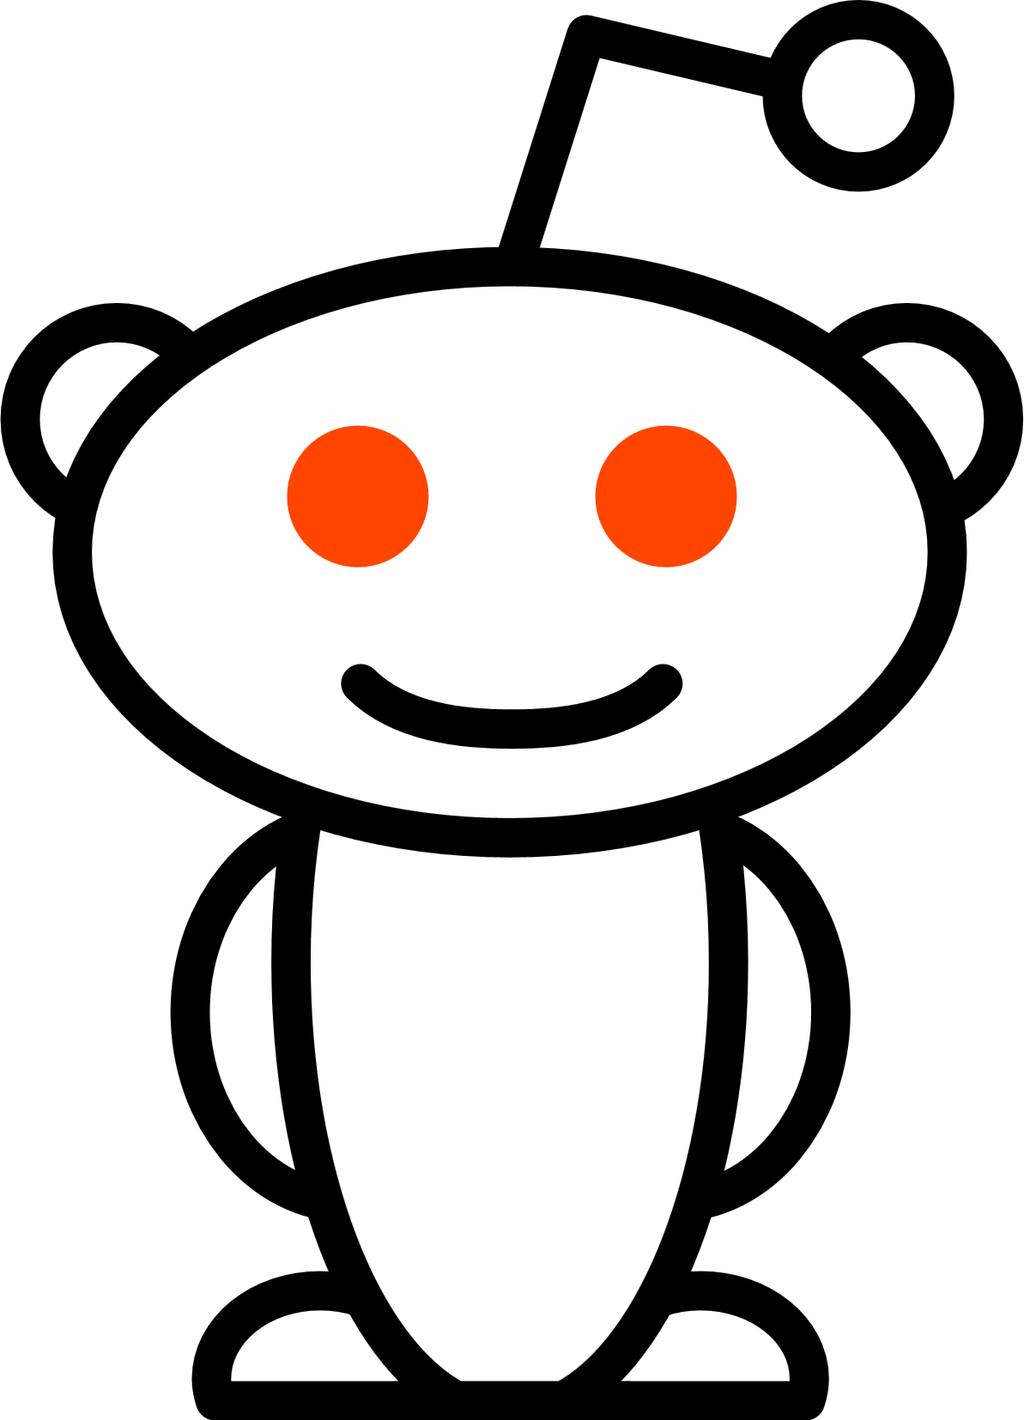 Key Takeaways on Reddit Your username should be somewhat anonymous (unless you re a company) Find and subscribe to relevant, hiring and industryrelated